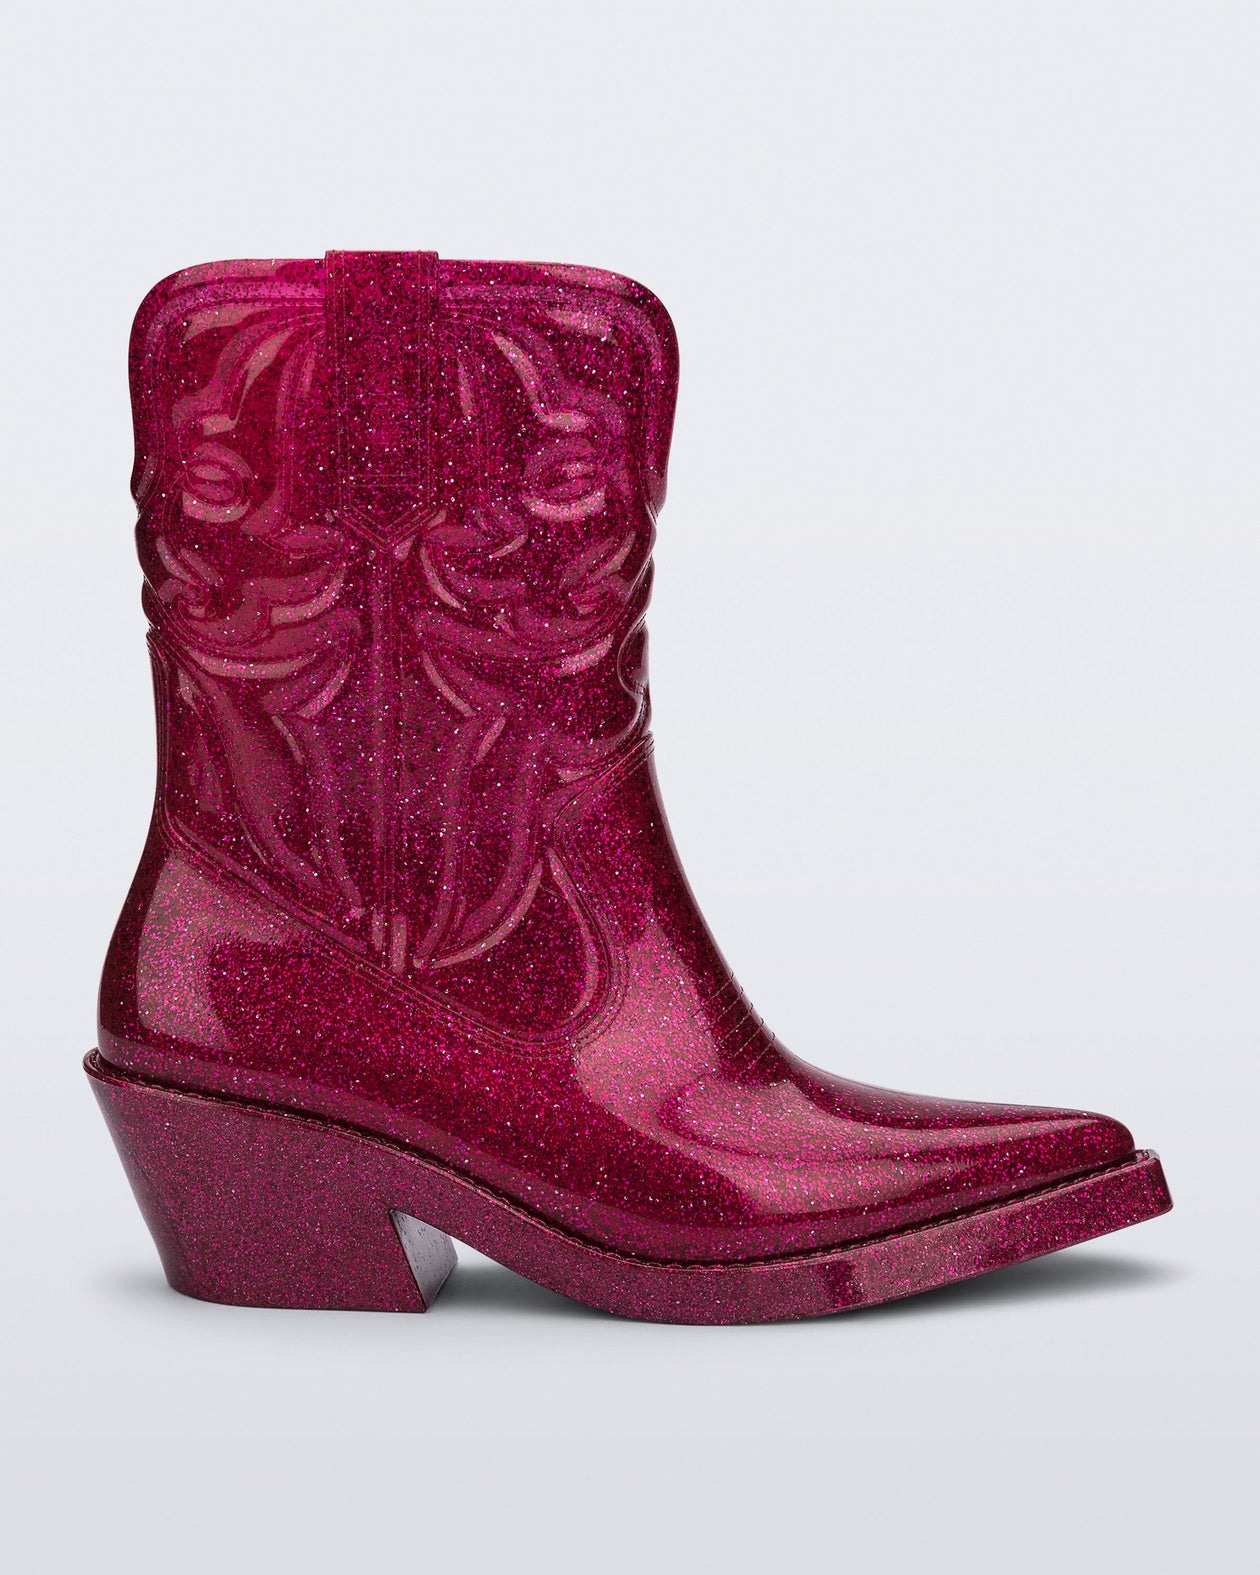 Side view of a glitter pink Texas boot with pointed toe.